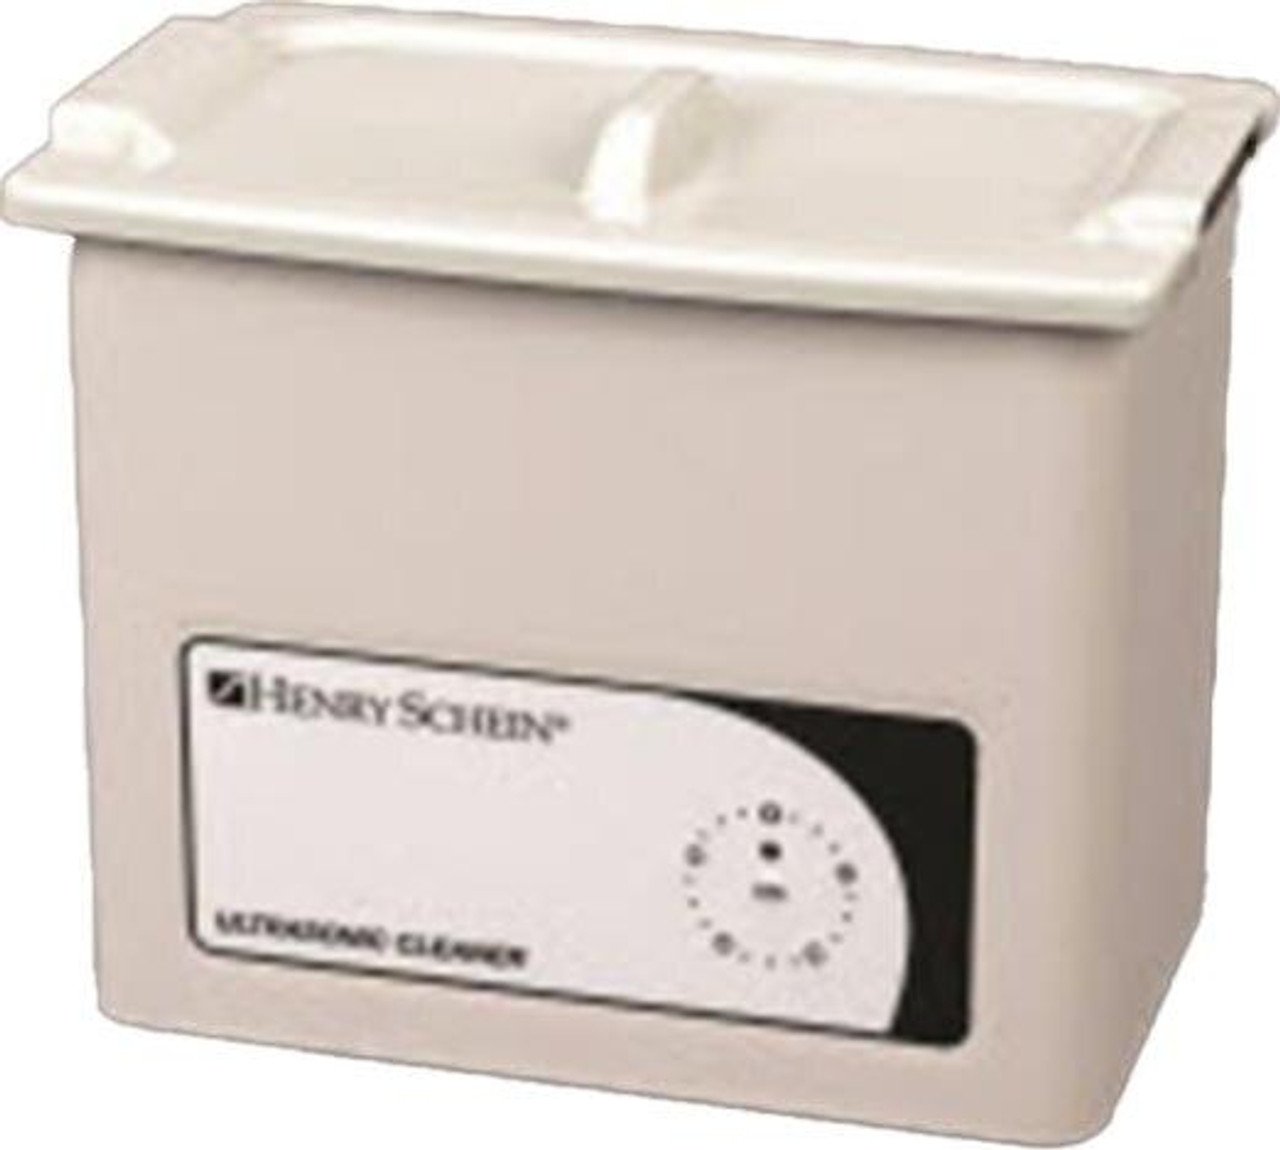 Henry Schein Ultrasonic Cleaner With Touchpad - Beige - .84 Gallons - D